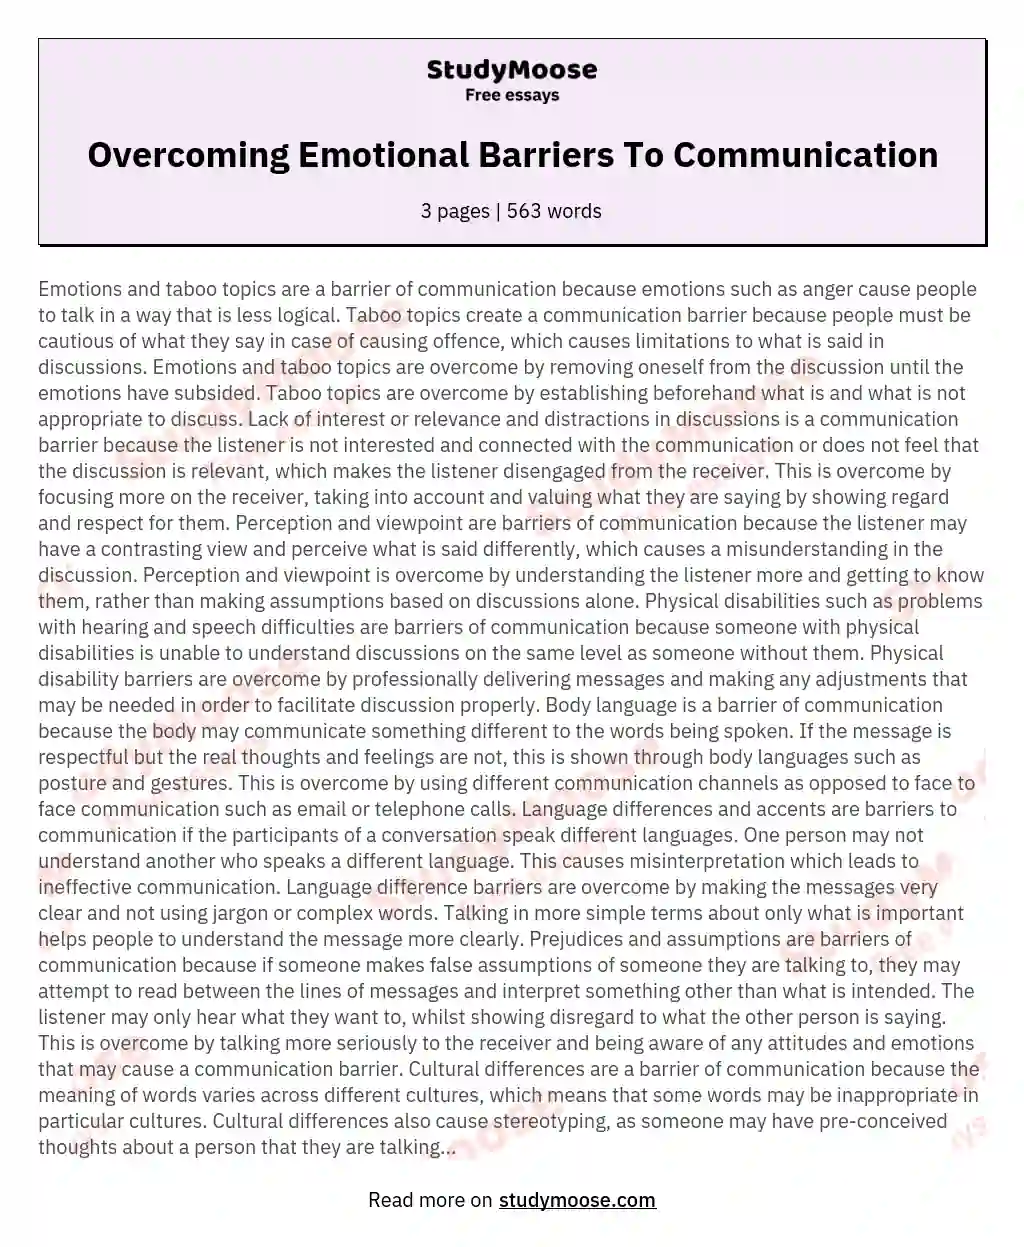 Overcoming Emotional Barriers To Communication essay